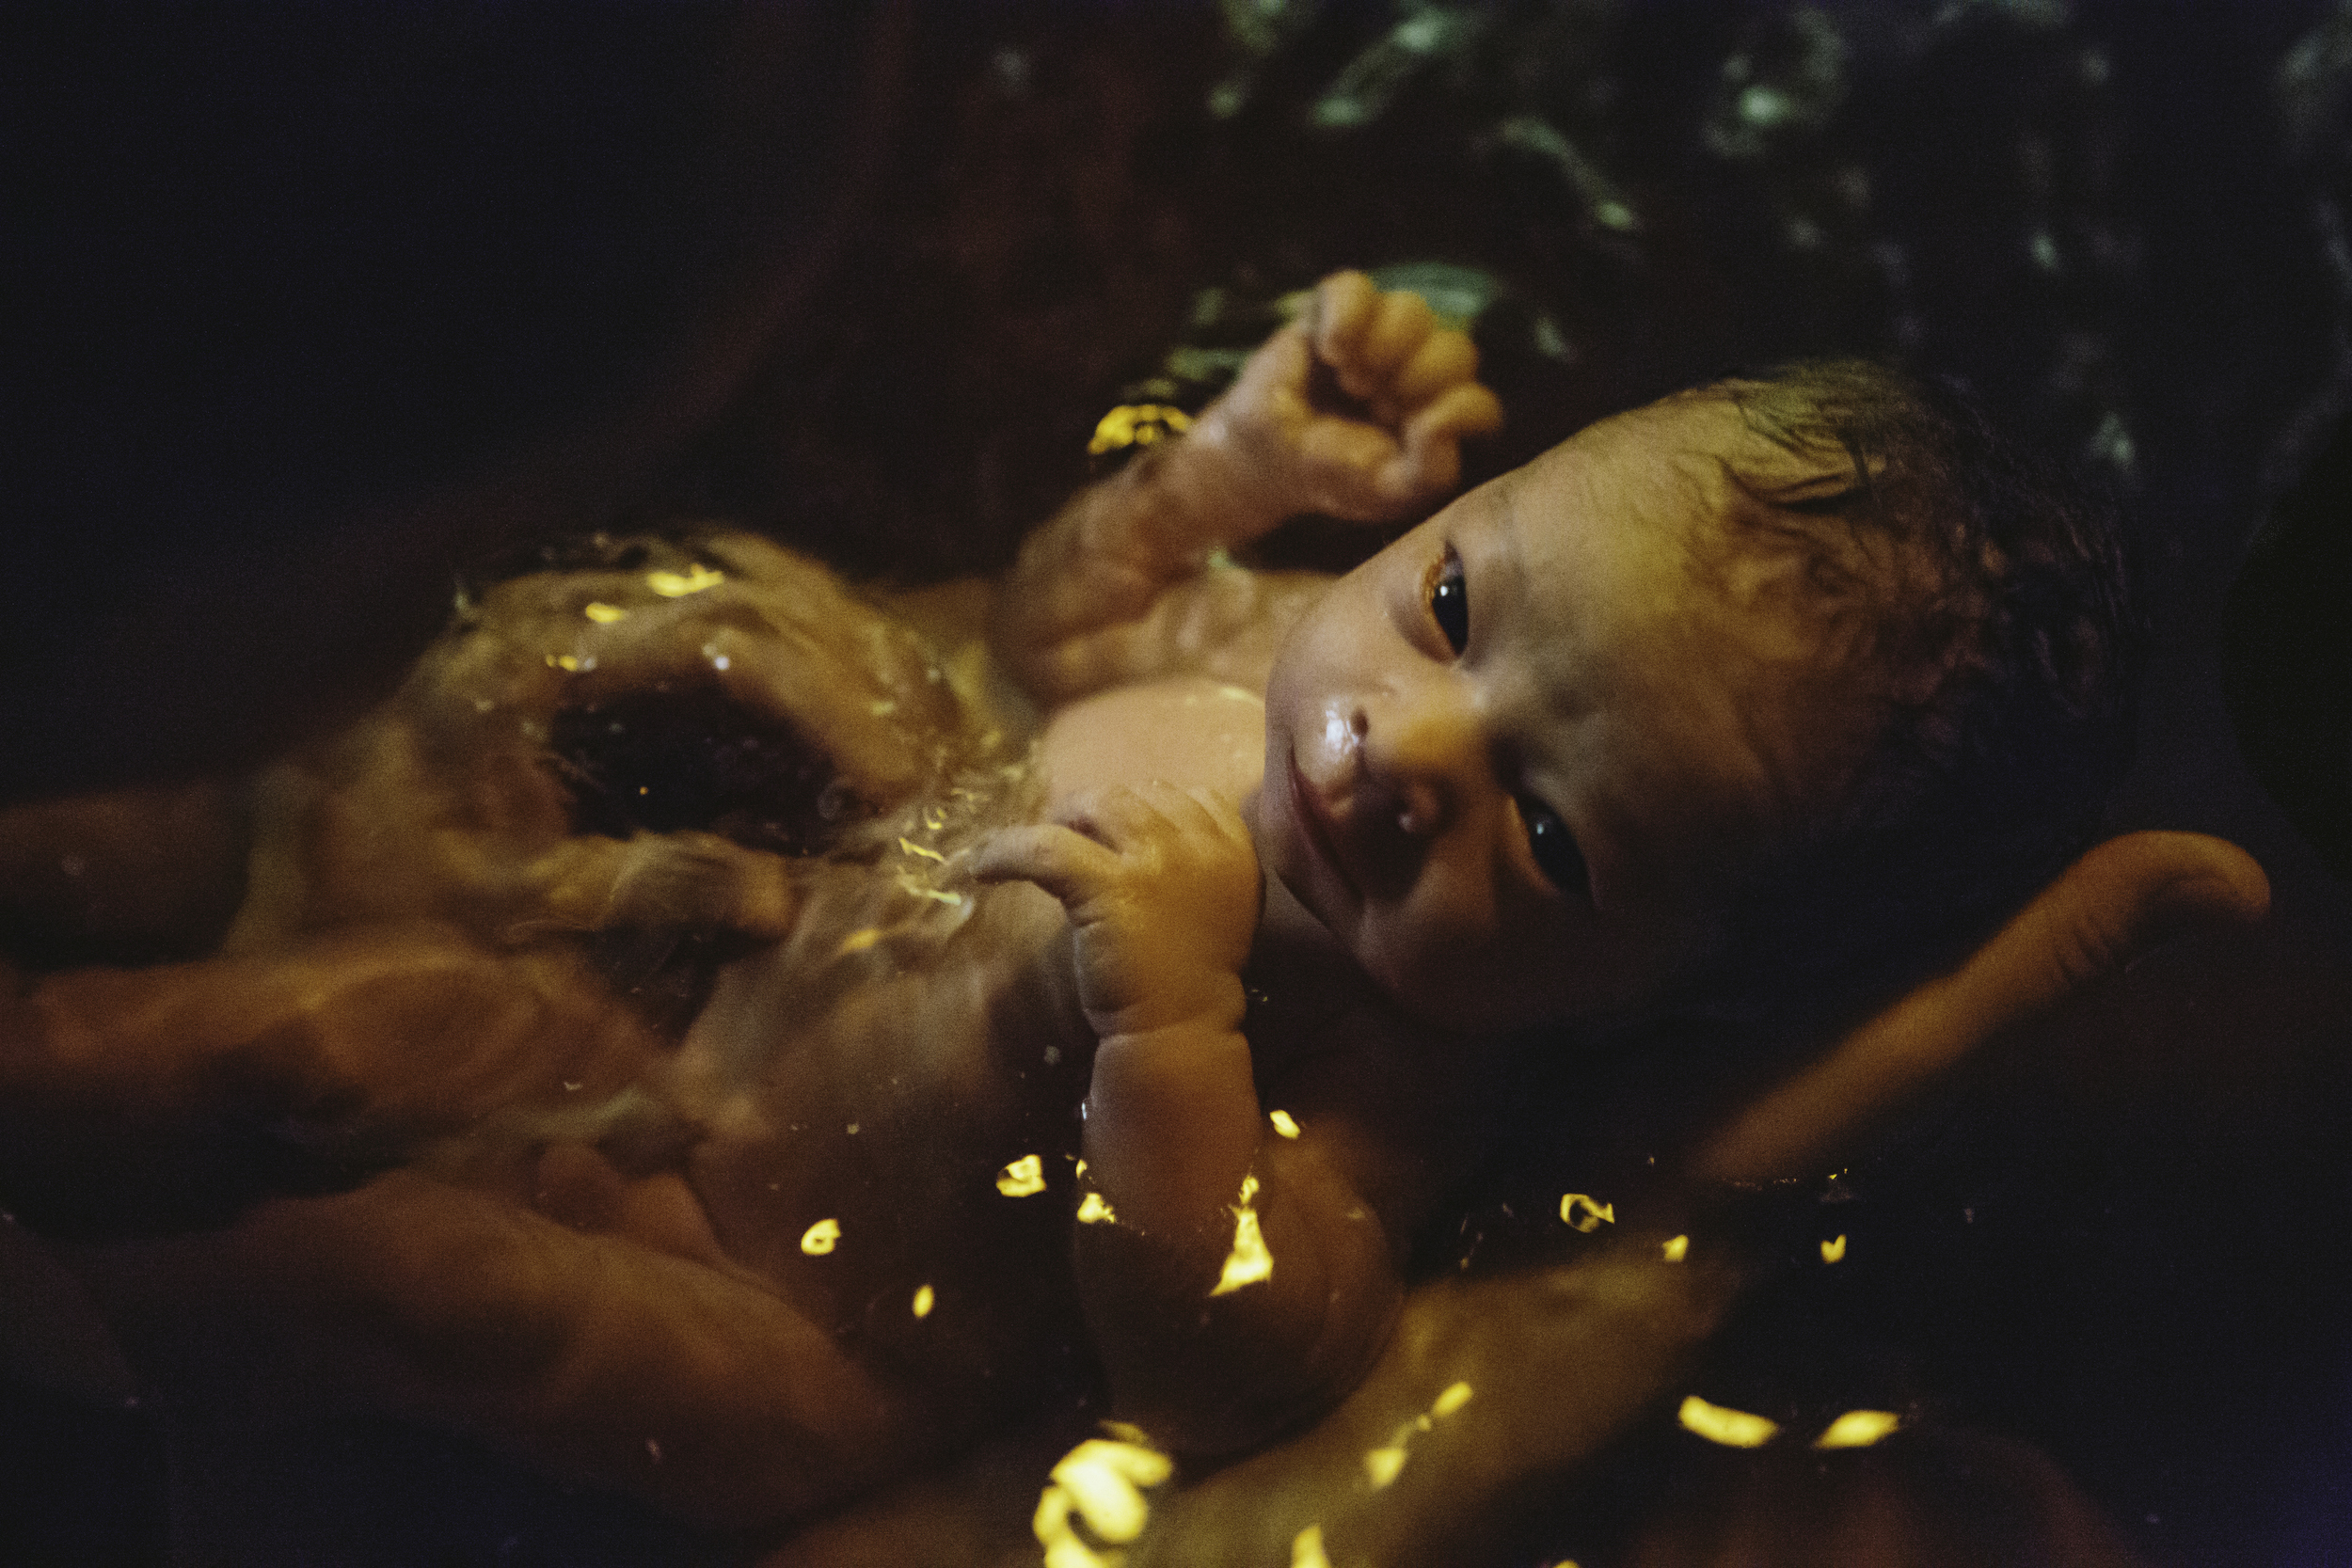 A newborn baby, with umbilical cord still attached, soaks in the water of the birthing pool, eyes gazing up at it's mother